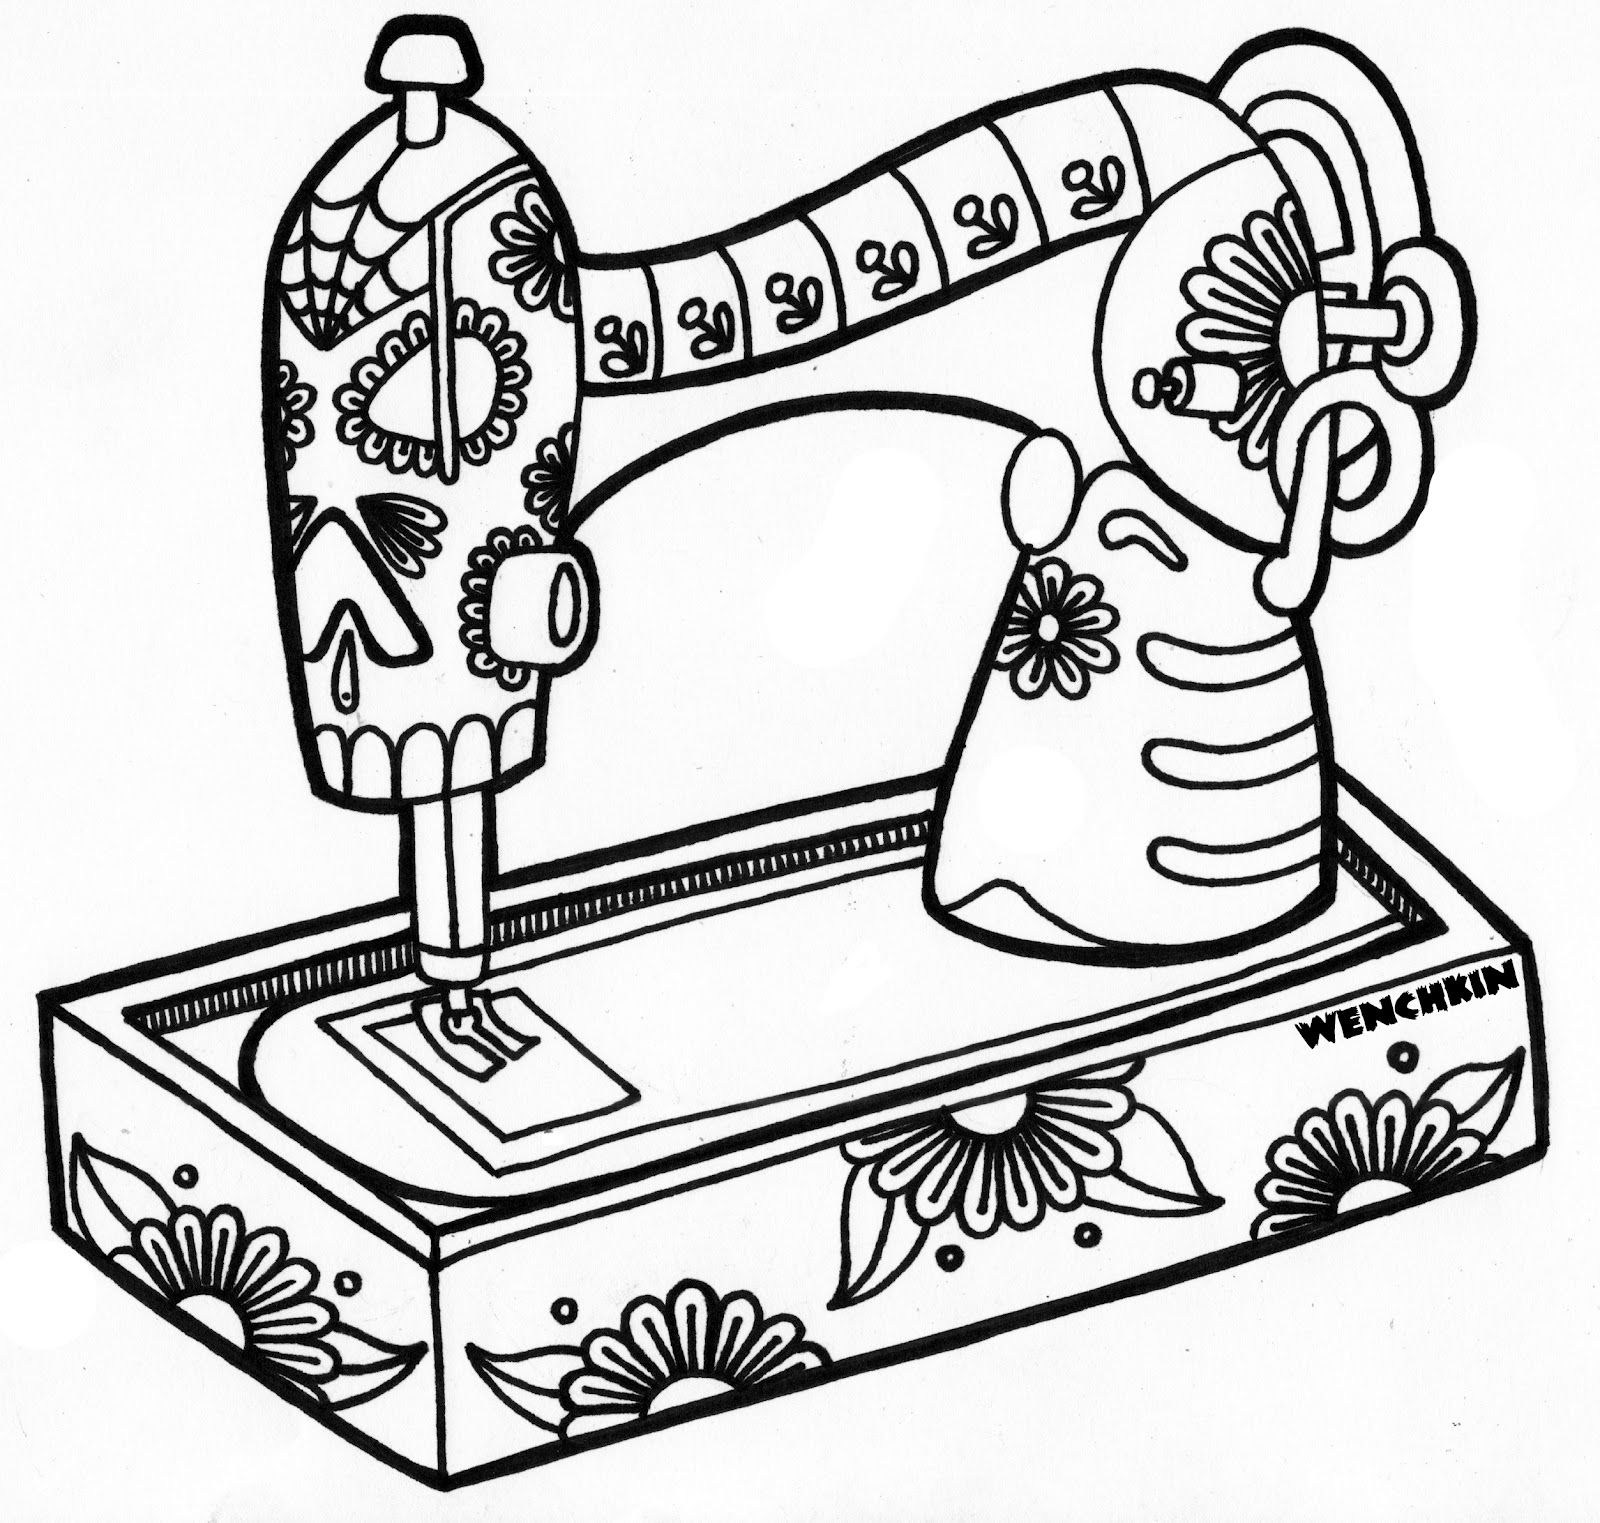 Yucca Flats, N.M.: Wenchkin's coloring pages - Skele Sewing Machine